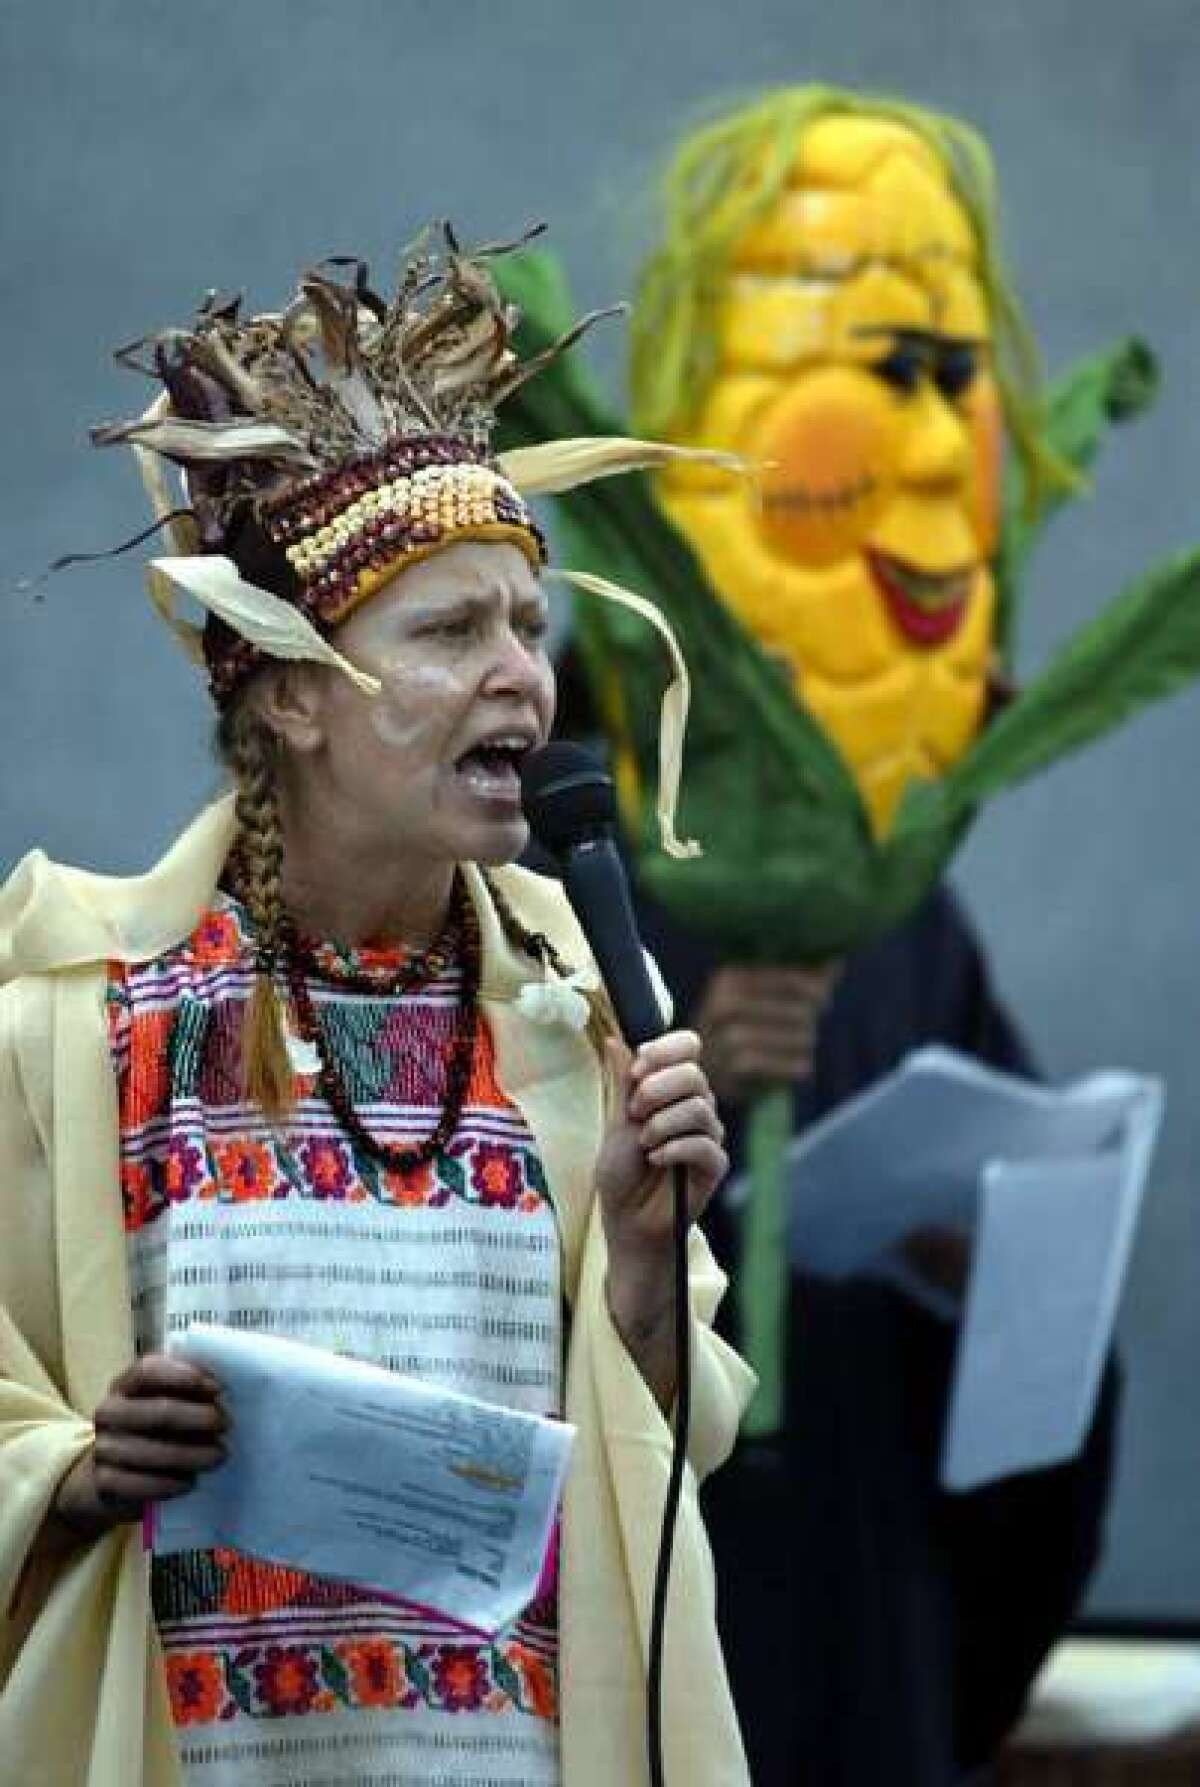 A protester in Sacramento speaks out against genetically modified corn.